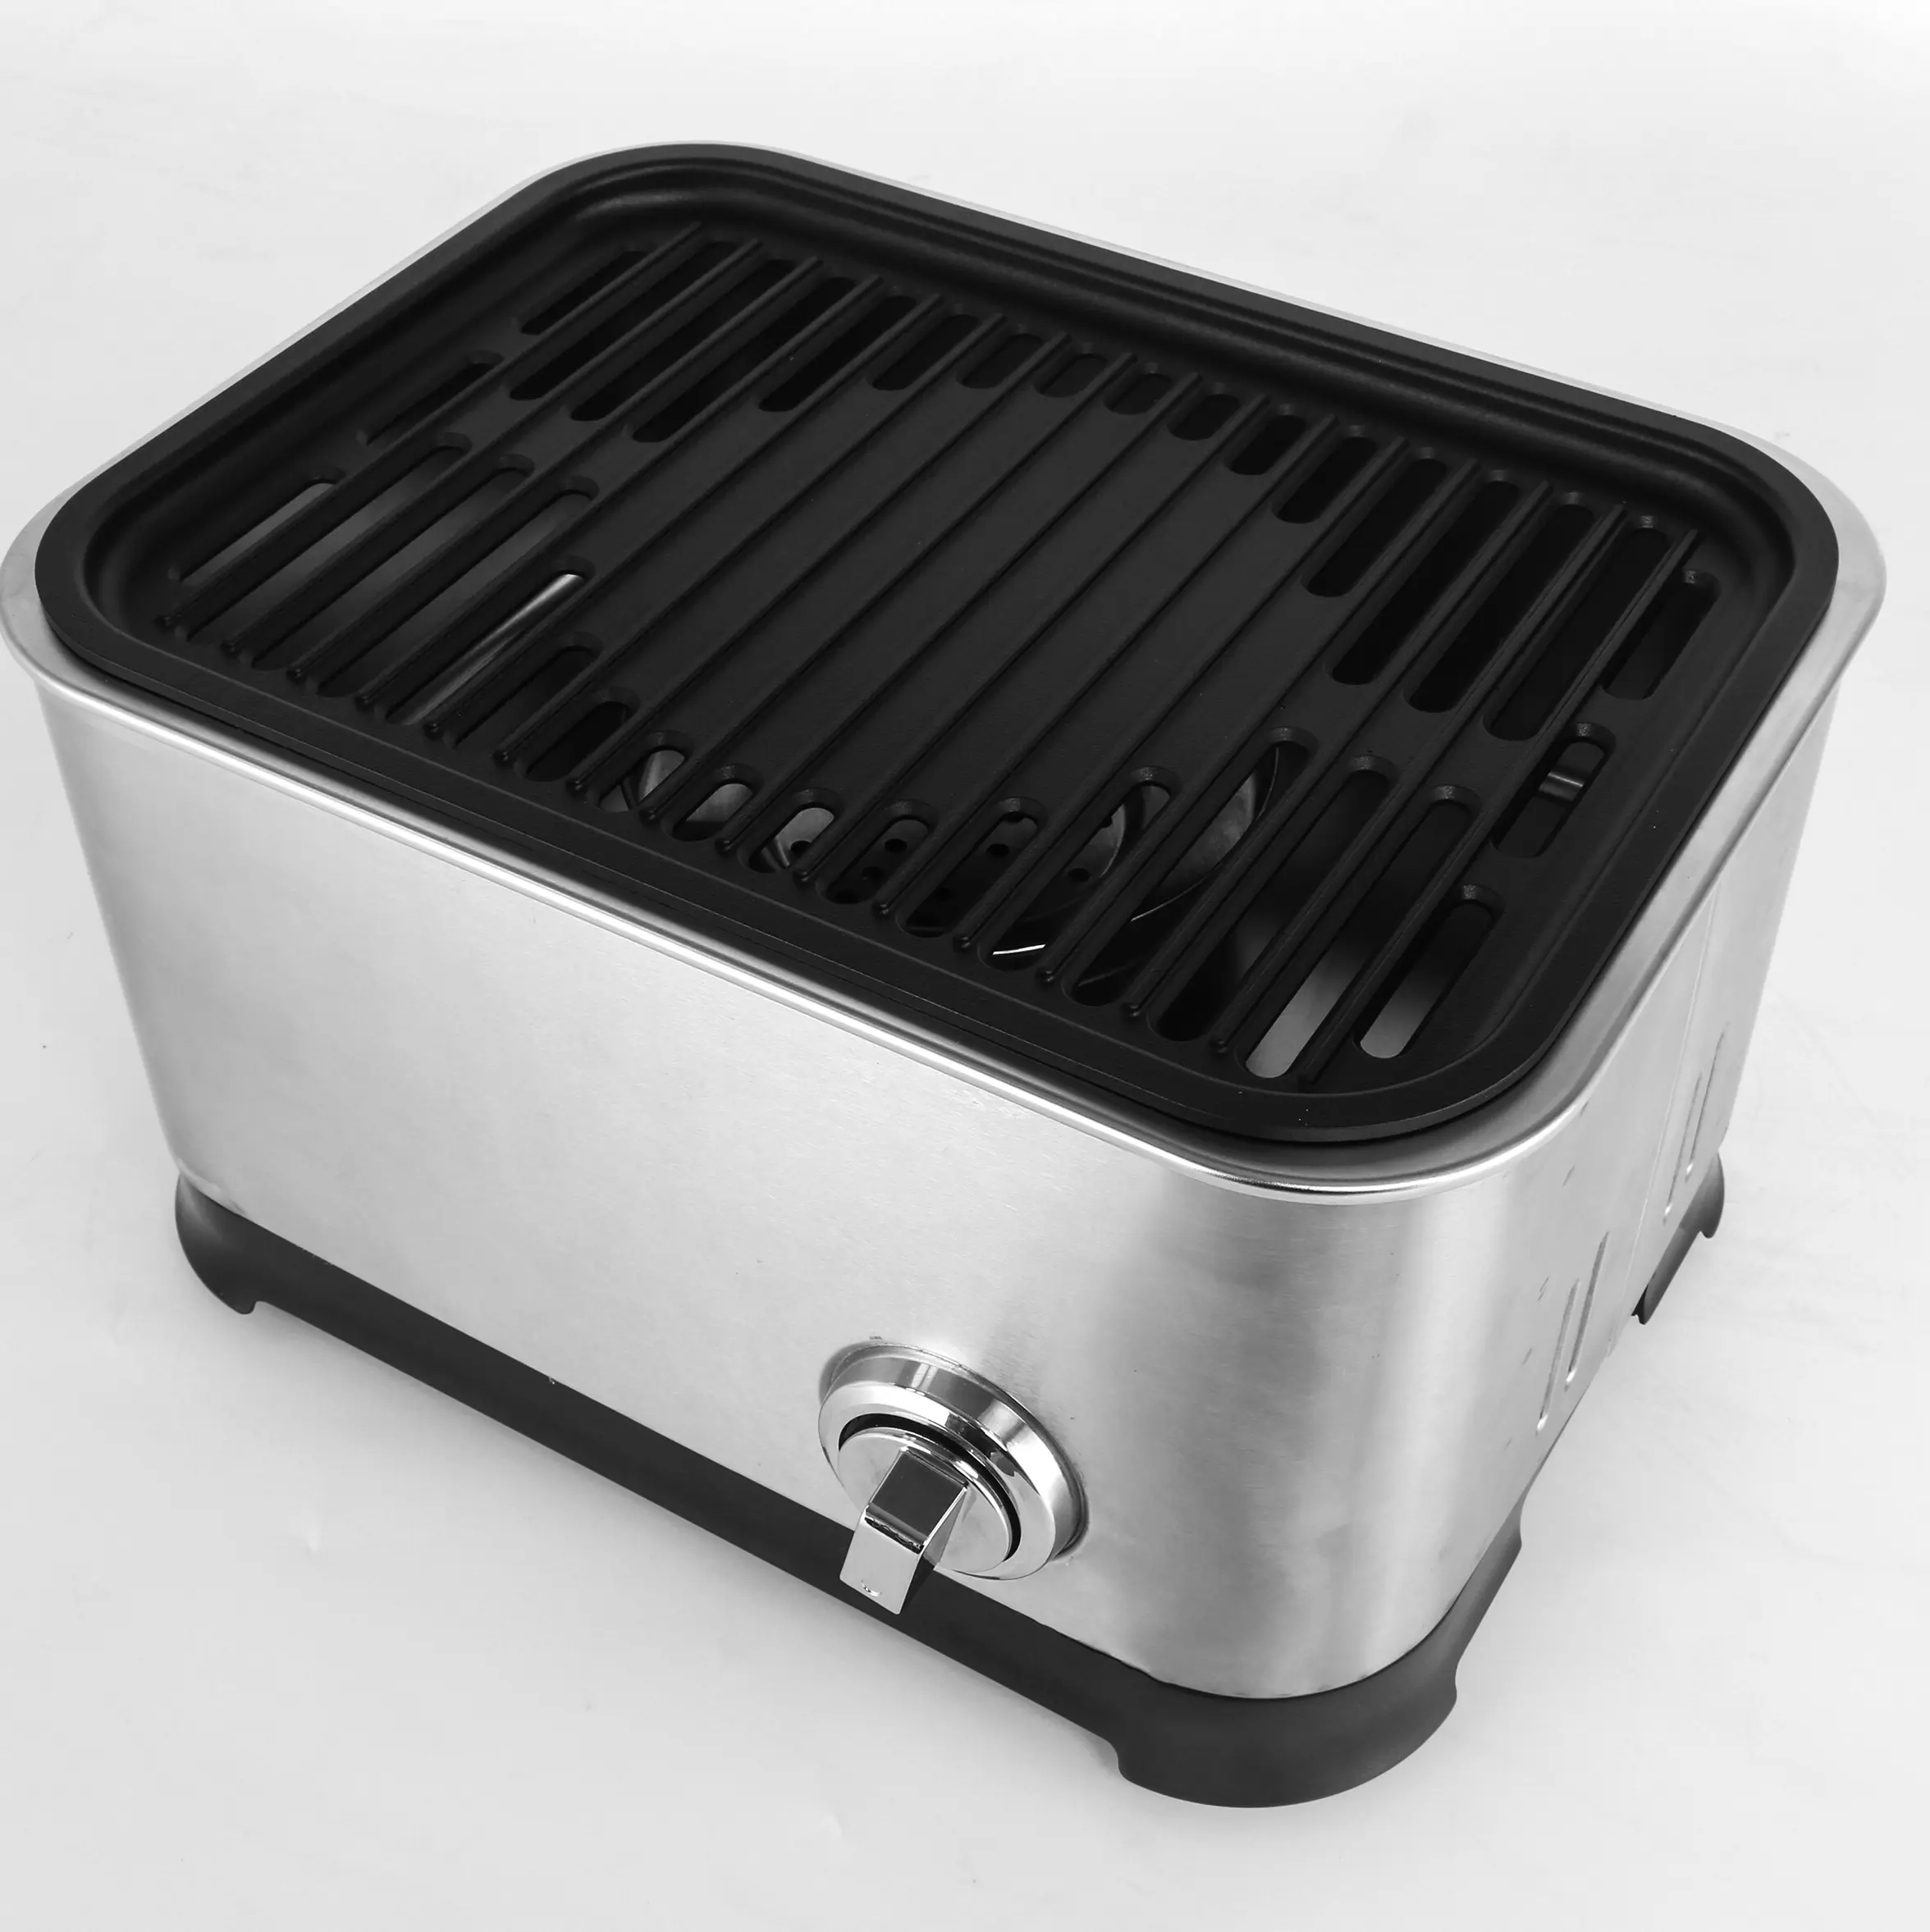 Smokeless Portable charcoal barbecue grill-Cast Iron bbq Grill-Take Anywhere BBQ Grill - USB Powered